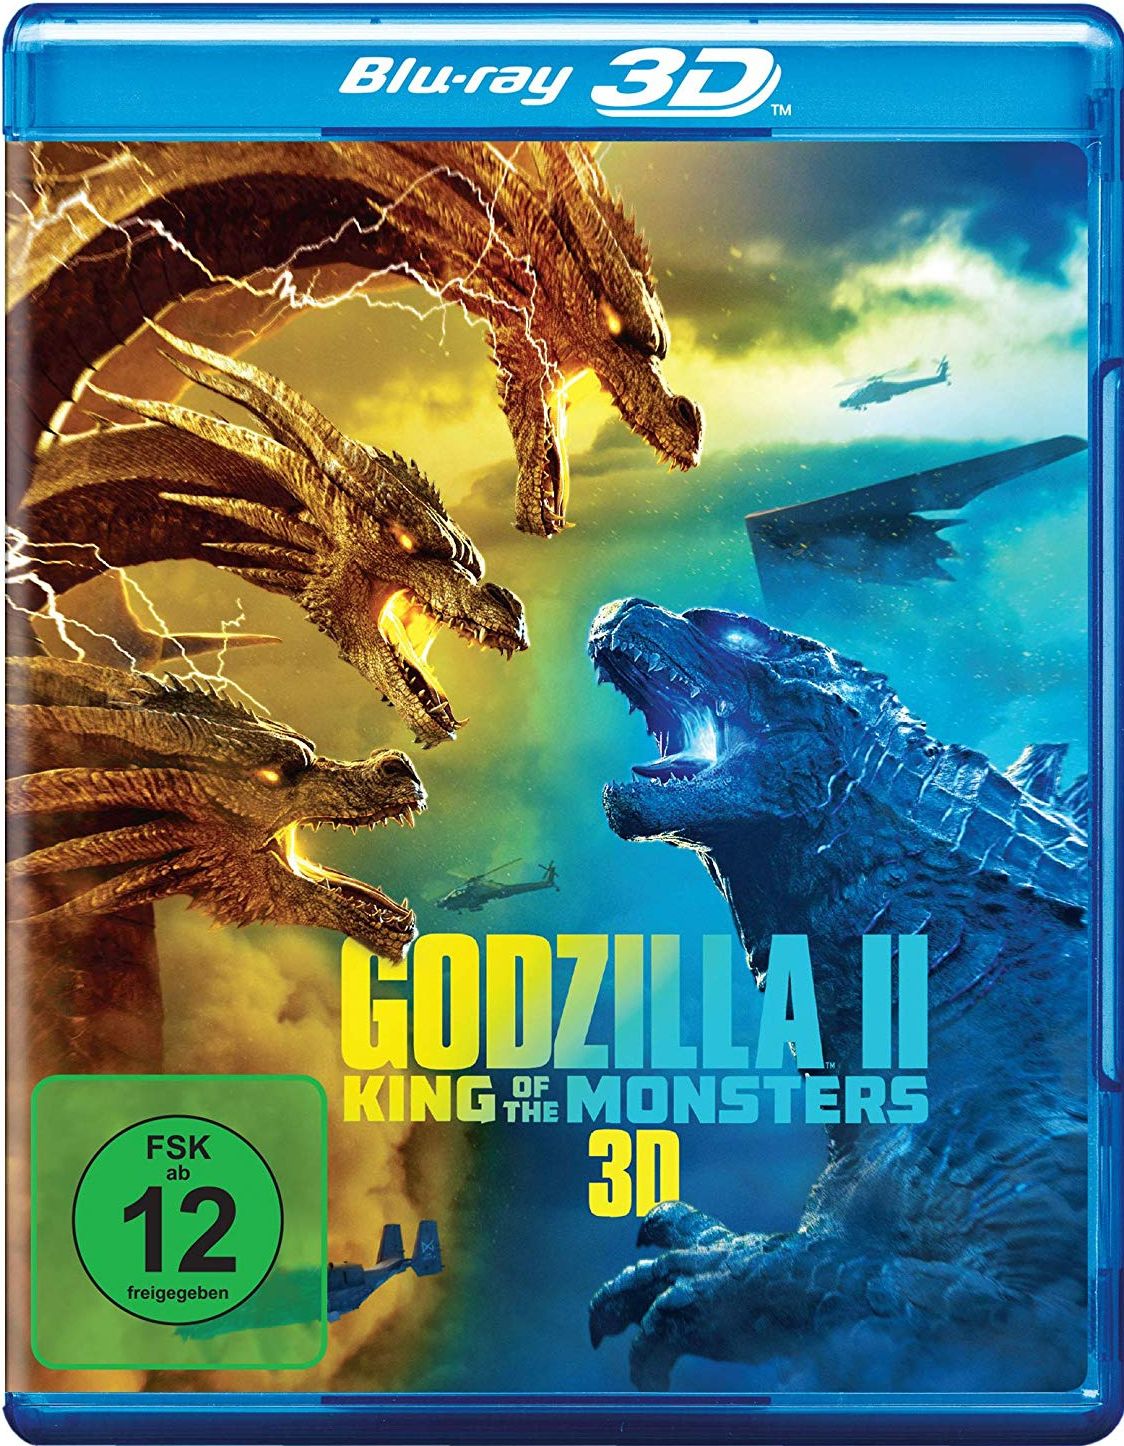 Godzilla 2 - King of the Monsters 3D (BLURAY 3D)